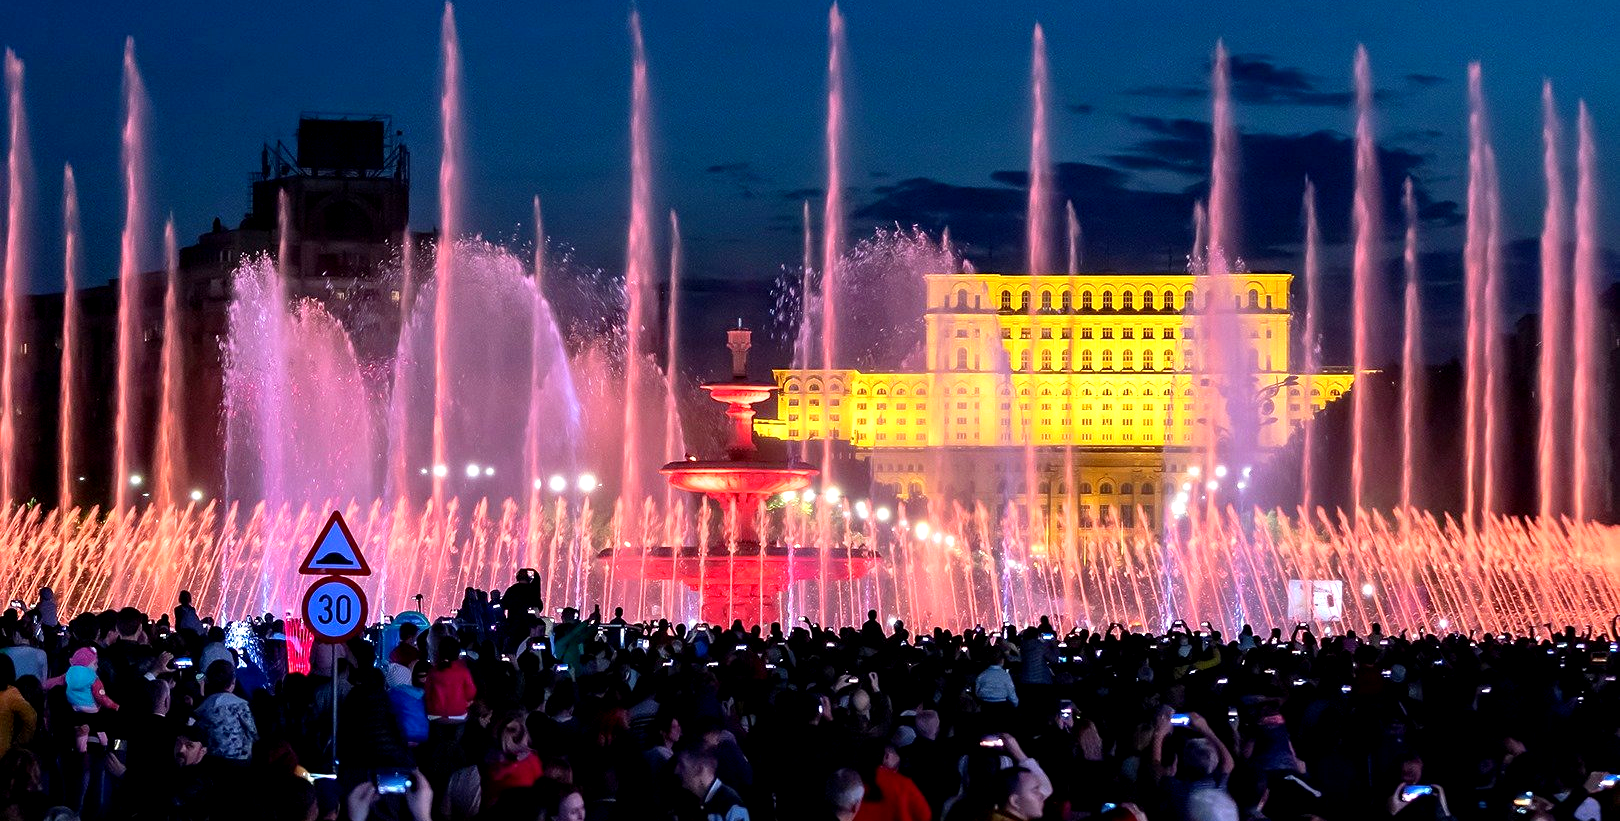 World's longest choreographed fountain system: Bucharest fountains